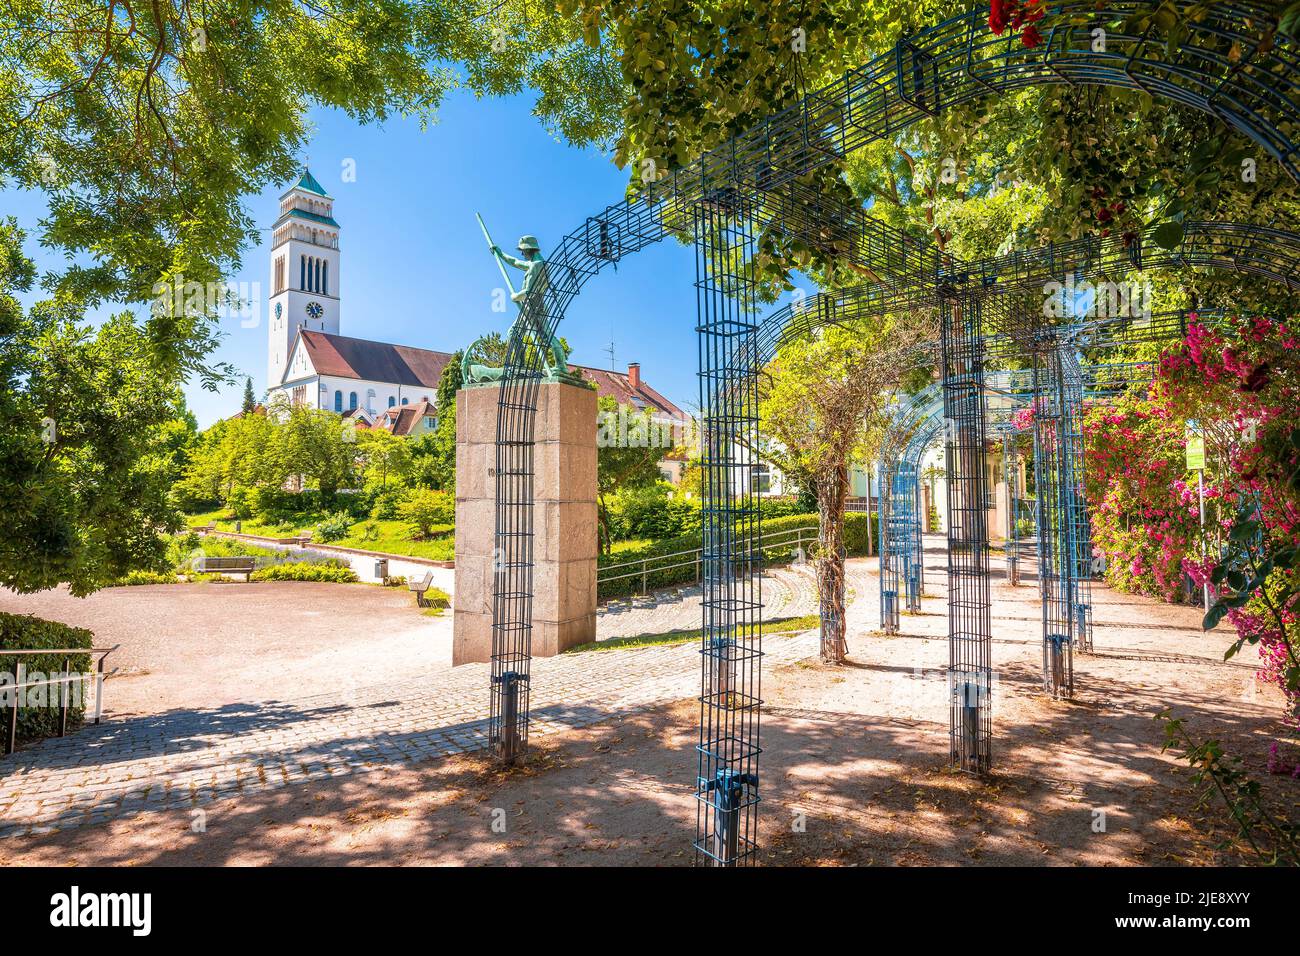 Town of Kehl flower garden Park and church view, Baden Wurttemberg region of Germany Stock Photo